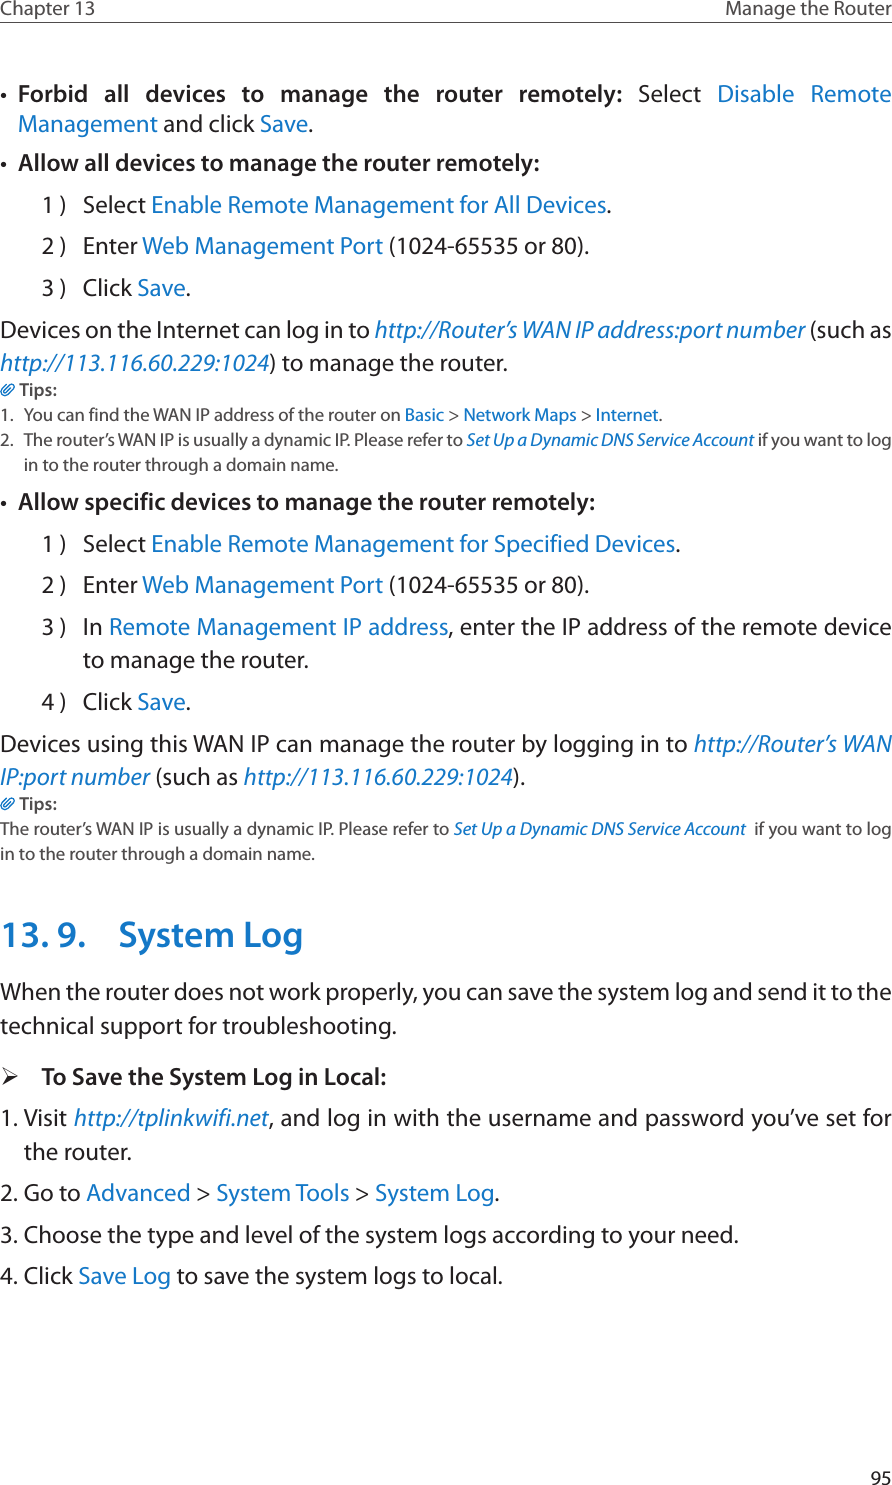 95Chapter 13 Manage the Router •  Forbid all devices to manage the router remotely:  Select  Disable Remote Management and click Save.•  Allow all devices to manage the router remotely:1 )  Select Enable Remote Management for All Devices.2 )  Enter Web Management Port (1024-65535 or 80).3 )  Click Save.Devices on the Internet can log in to http://Router’s WAN IP address:port number (such as http://113.116.60.229:1024) to manage the router.Tips:1.  You can find the WAN IP address of the router on Basic &gt; Network Maps &gt; Internet.2.  The router’s WAN IP is usually a dynamic IP. Please refer to Set Up a Dynamic DNS Service Account if you want to log in to the router through a domain name.•  Allow specific devices to manage the router remotely:1 )  Select Enable Remote Management for Specified Devices.2 )  Enter Web Management Port (1024-65535 or 80).3 )  In Remote Management IP address, enter the IP address of the remote device to manage the router.4 )  Click Save.Devices using this WAN IP can manage the router by logging in to http://Router’s WAN IP:port number (such as http://113.116.60.229:1024).Tips: The router’s WAN IP is usually a dynamic IP. Please refer to Set Up a Dynamic DNS Service Account  if you want to log in to the router through a domain name.13. 9.  System LogWhen the router does not work properly, you can save the system log and send it to the technical support for troubleshooting. ¾To Save the System Log in Local:1. Visit http://tplinkwifi.net, and log in with the username and password you’ve set for the router.2. Go to Advanced &gt; System Tools &gt; System Log.3. Choose the type and level of the system logs according to your need.4. Click Save Log to save the system logs to local.